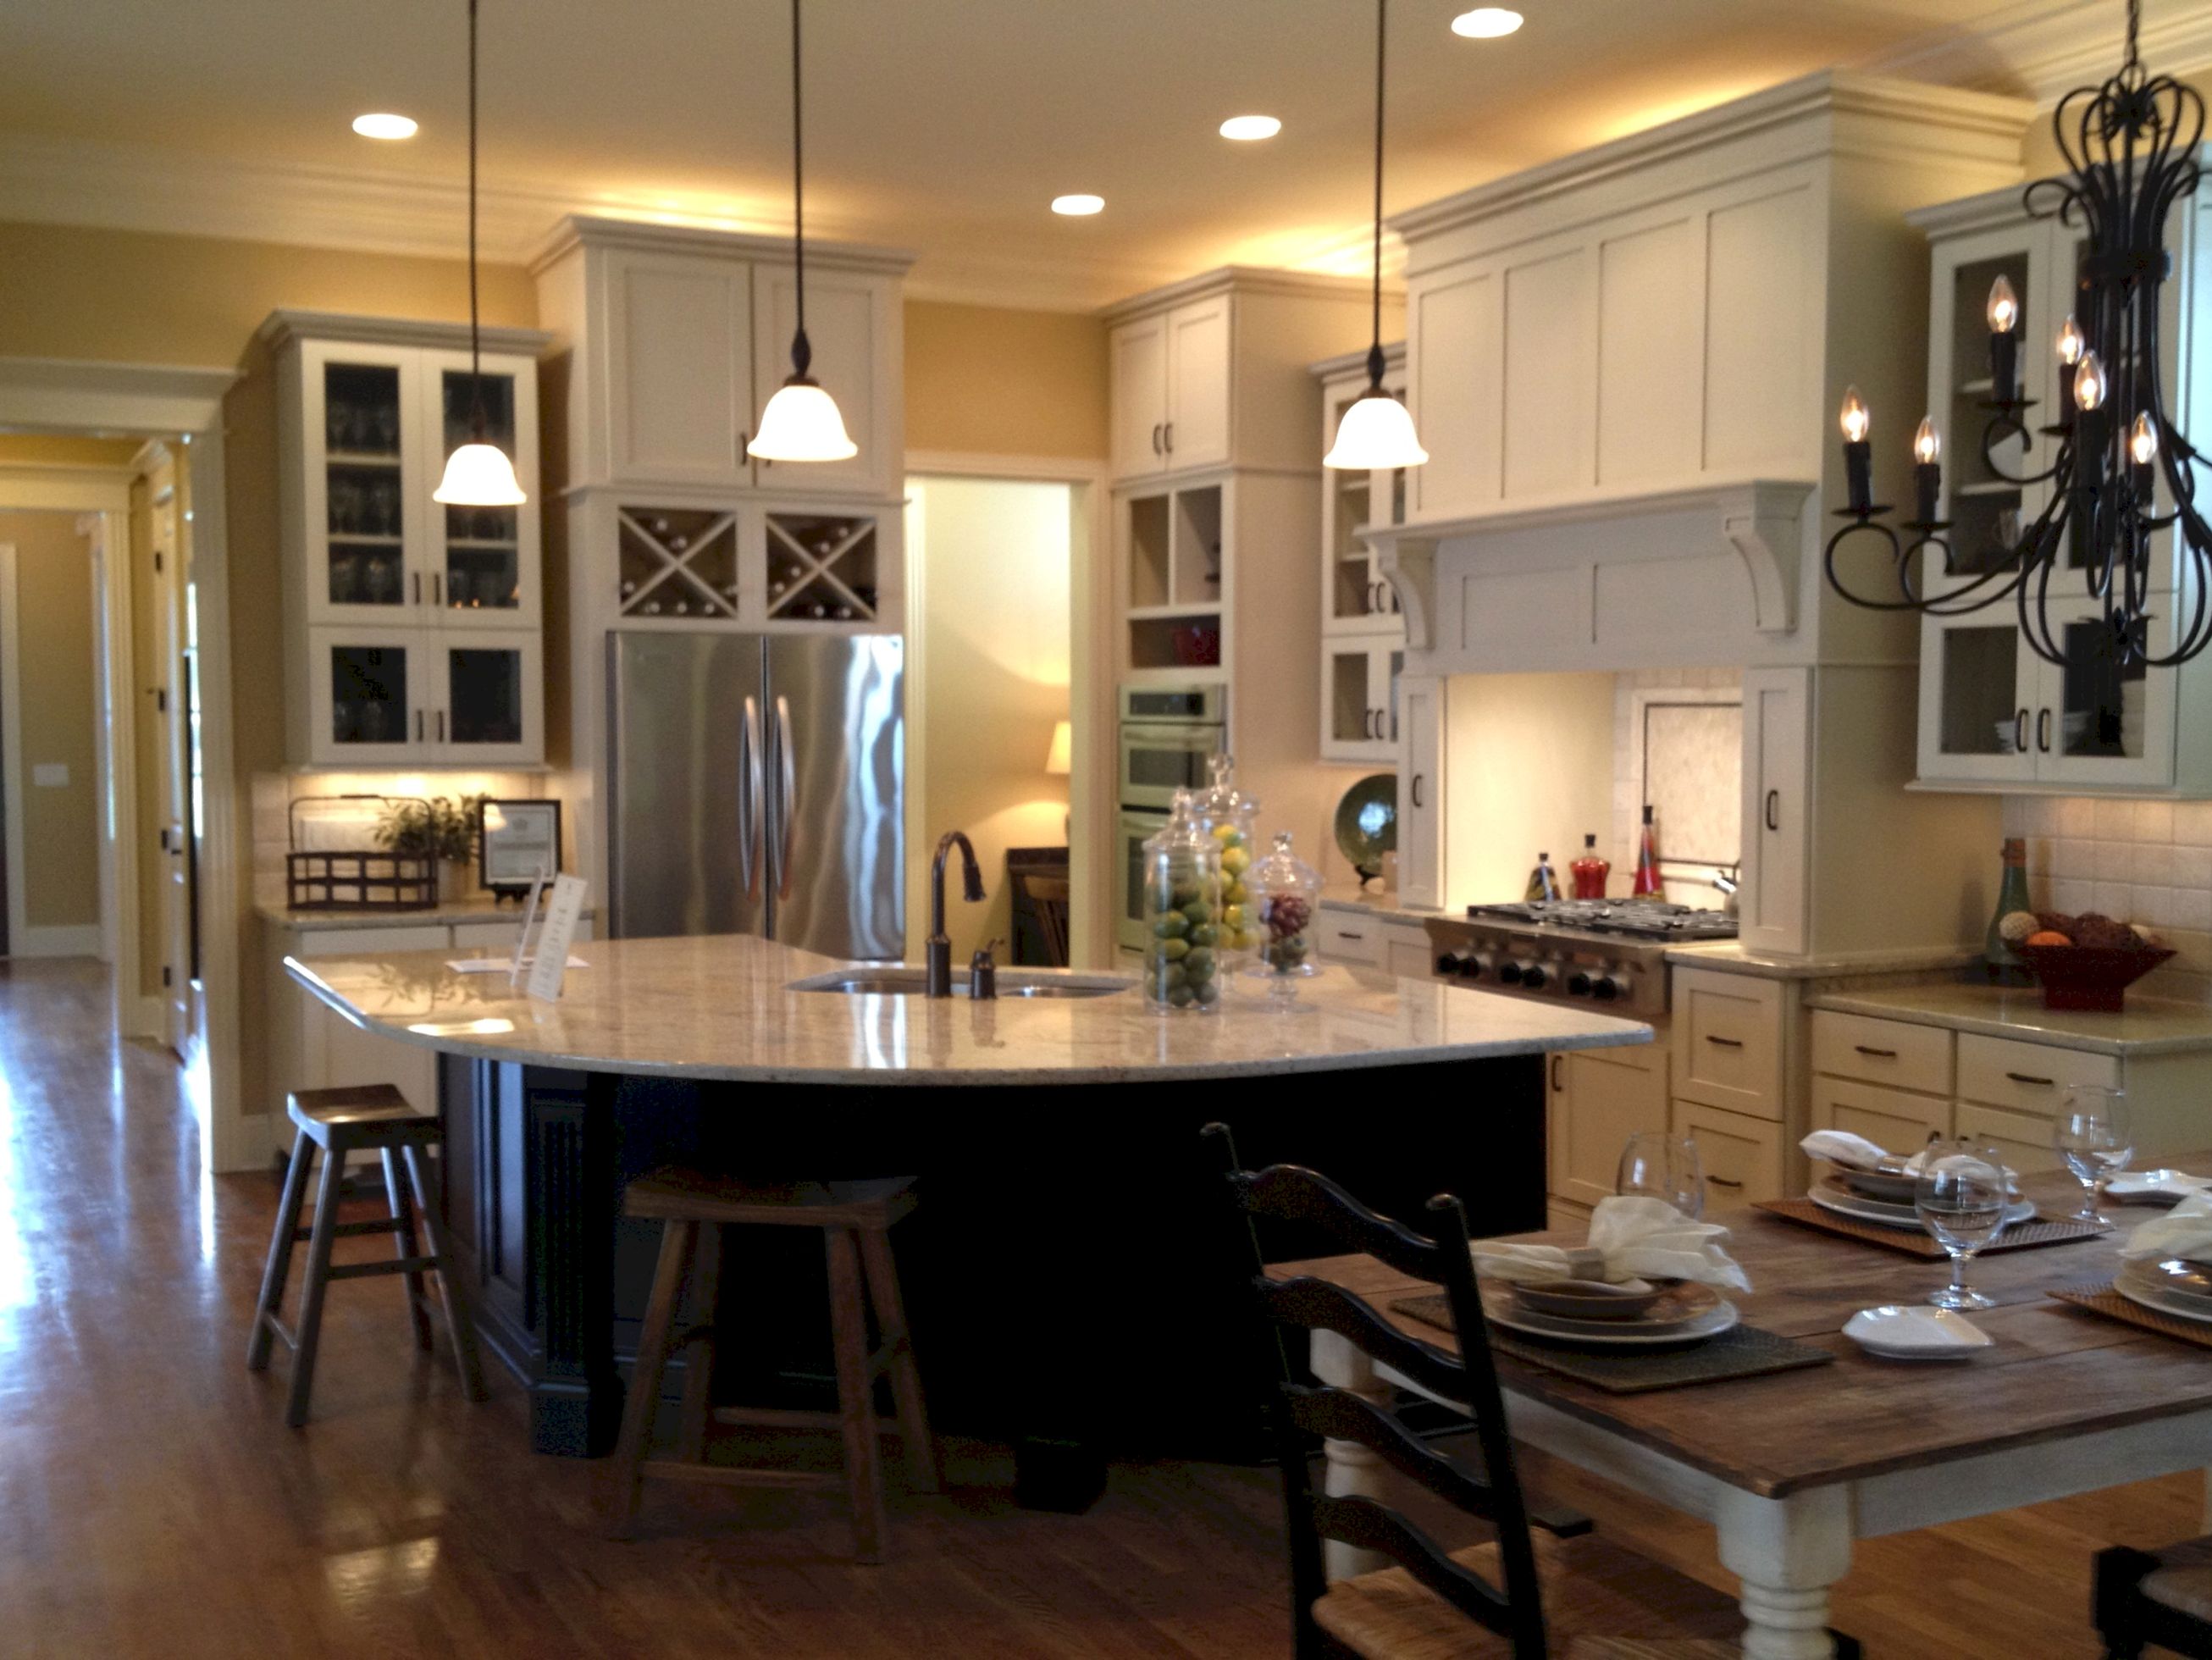 Kitchen Dining Chairs photo - 1